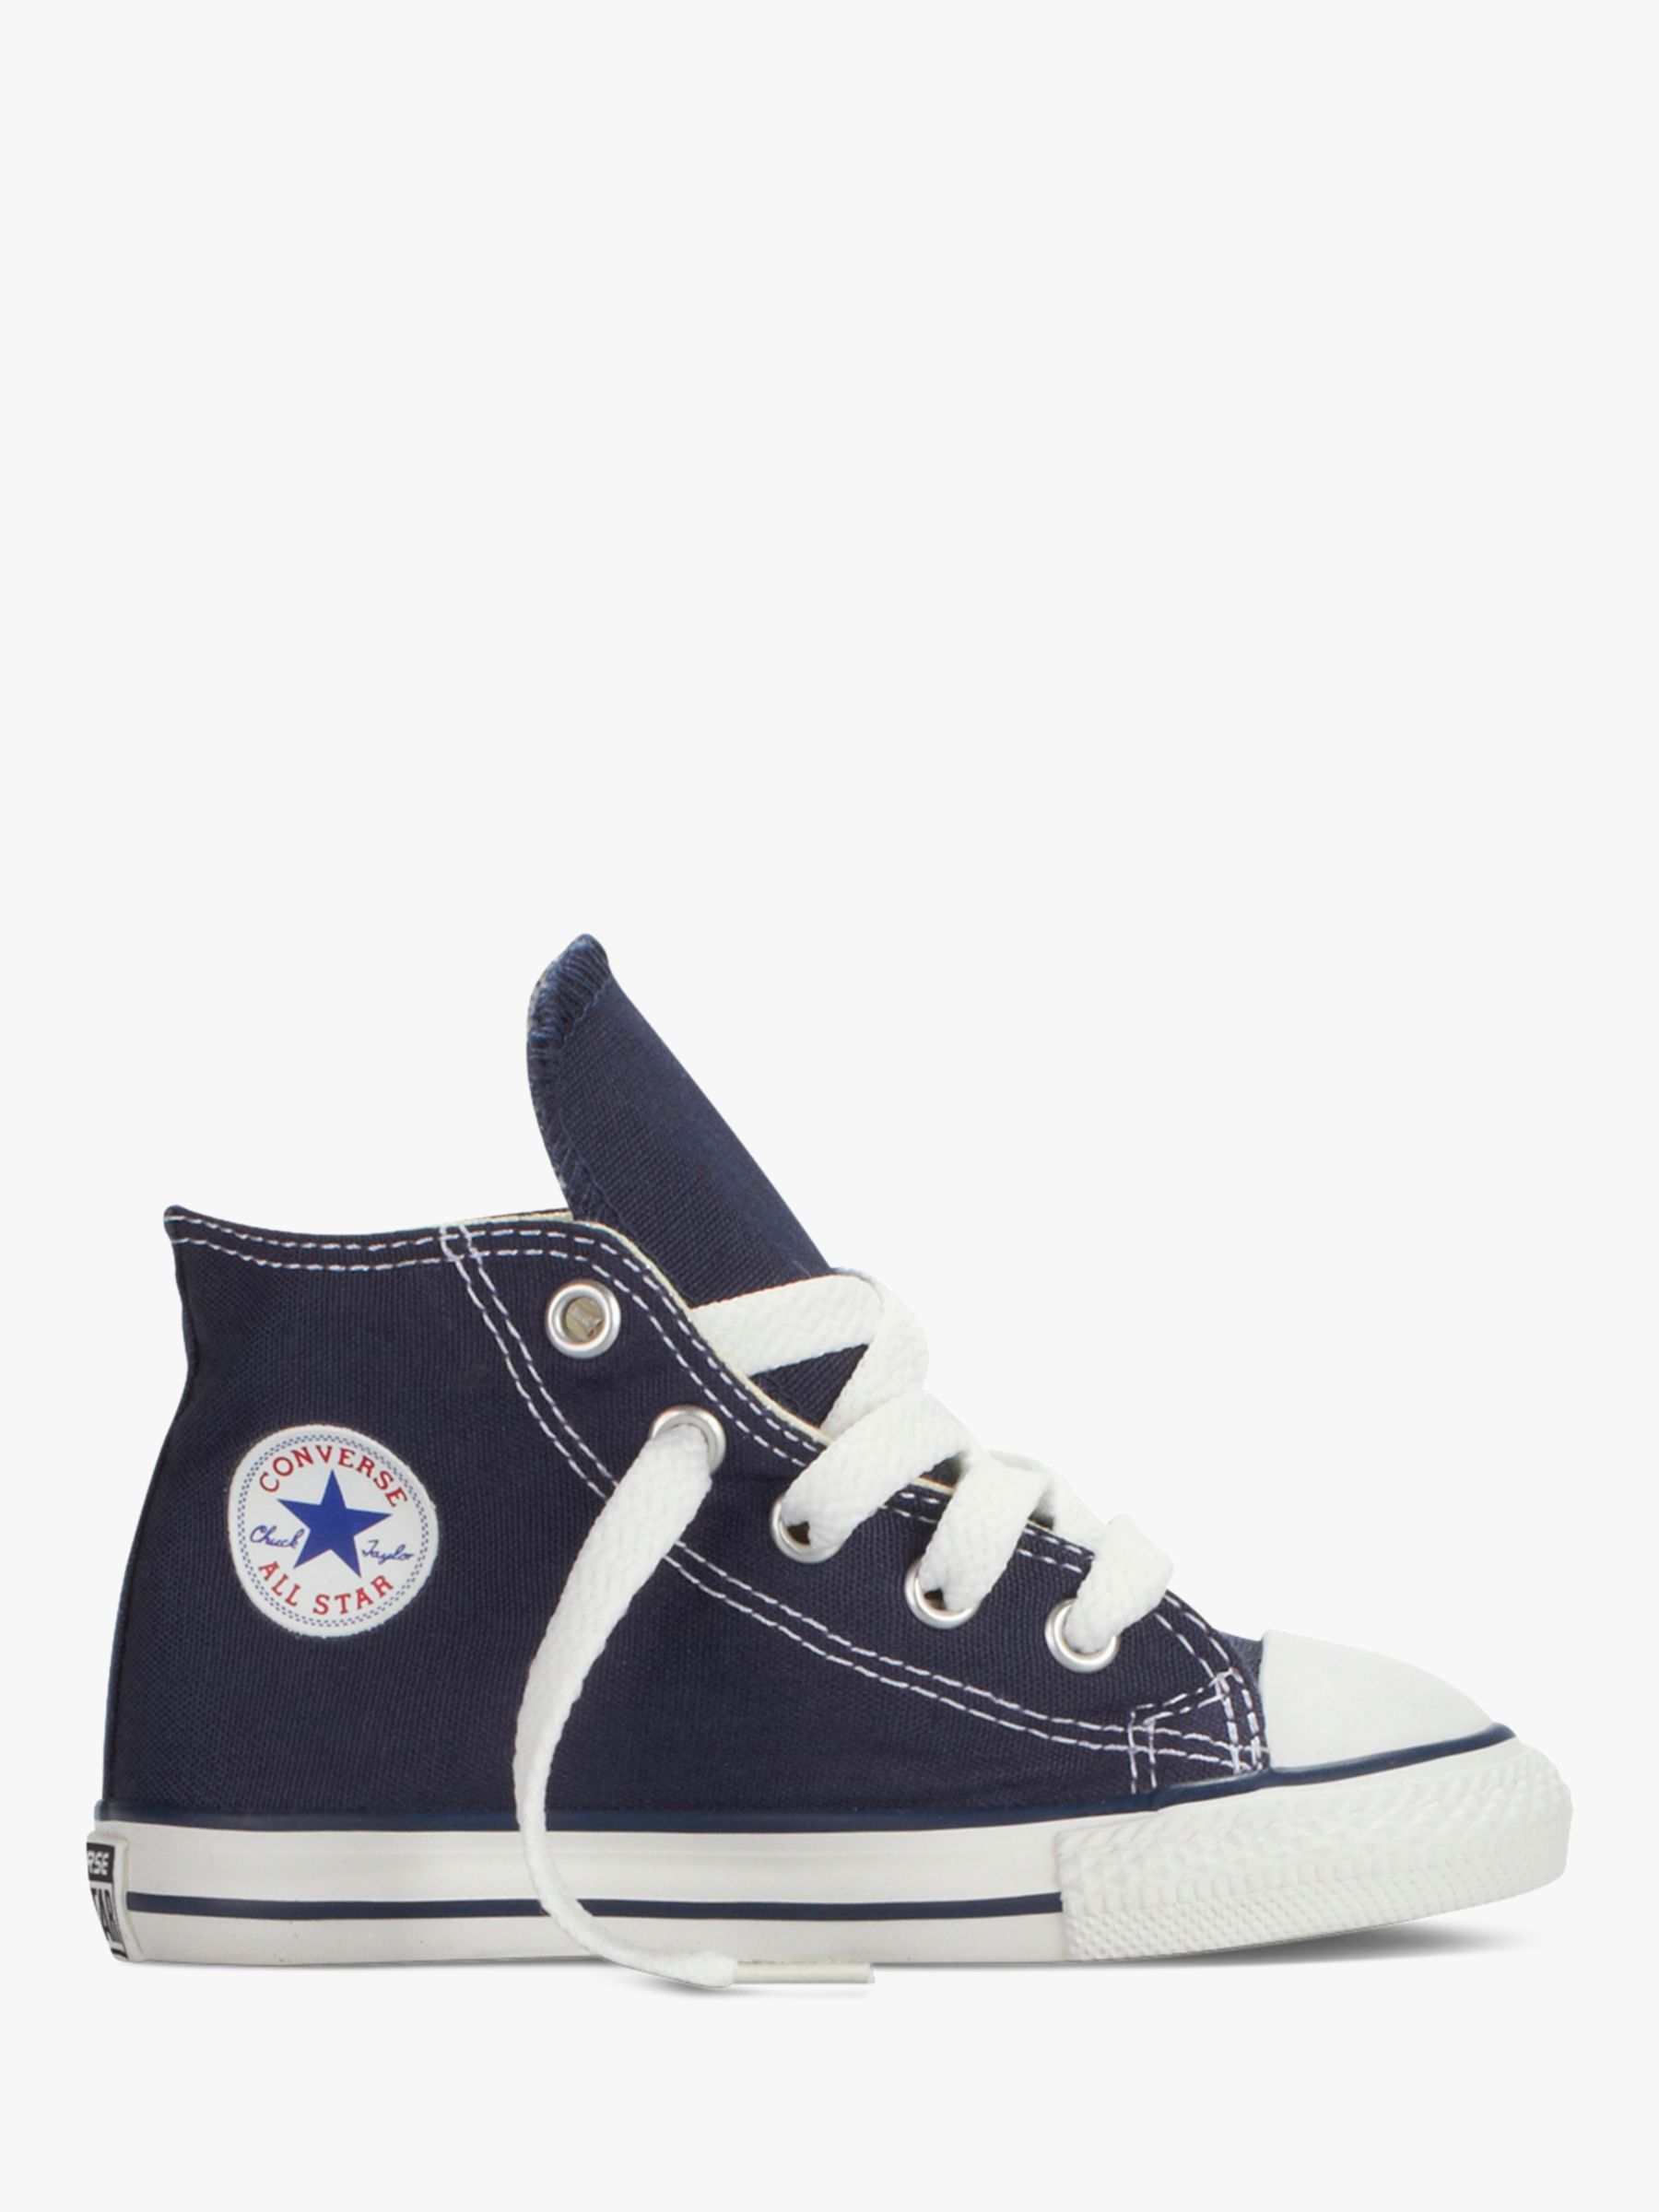 Converse All Star Core-Hi Trainers, Navy, Size 1 Adult